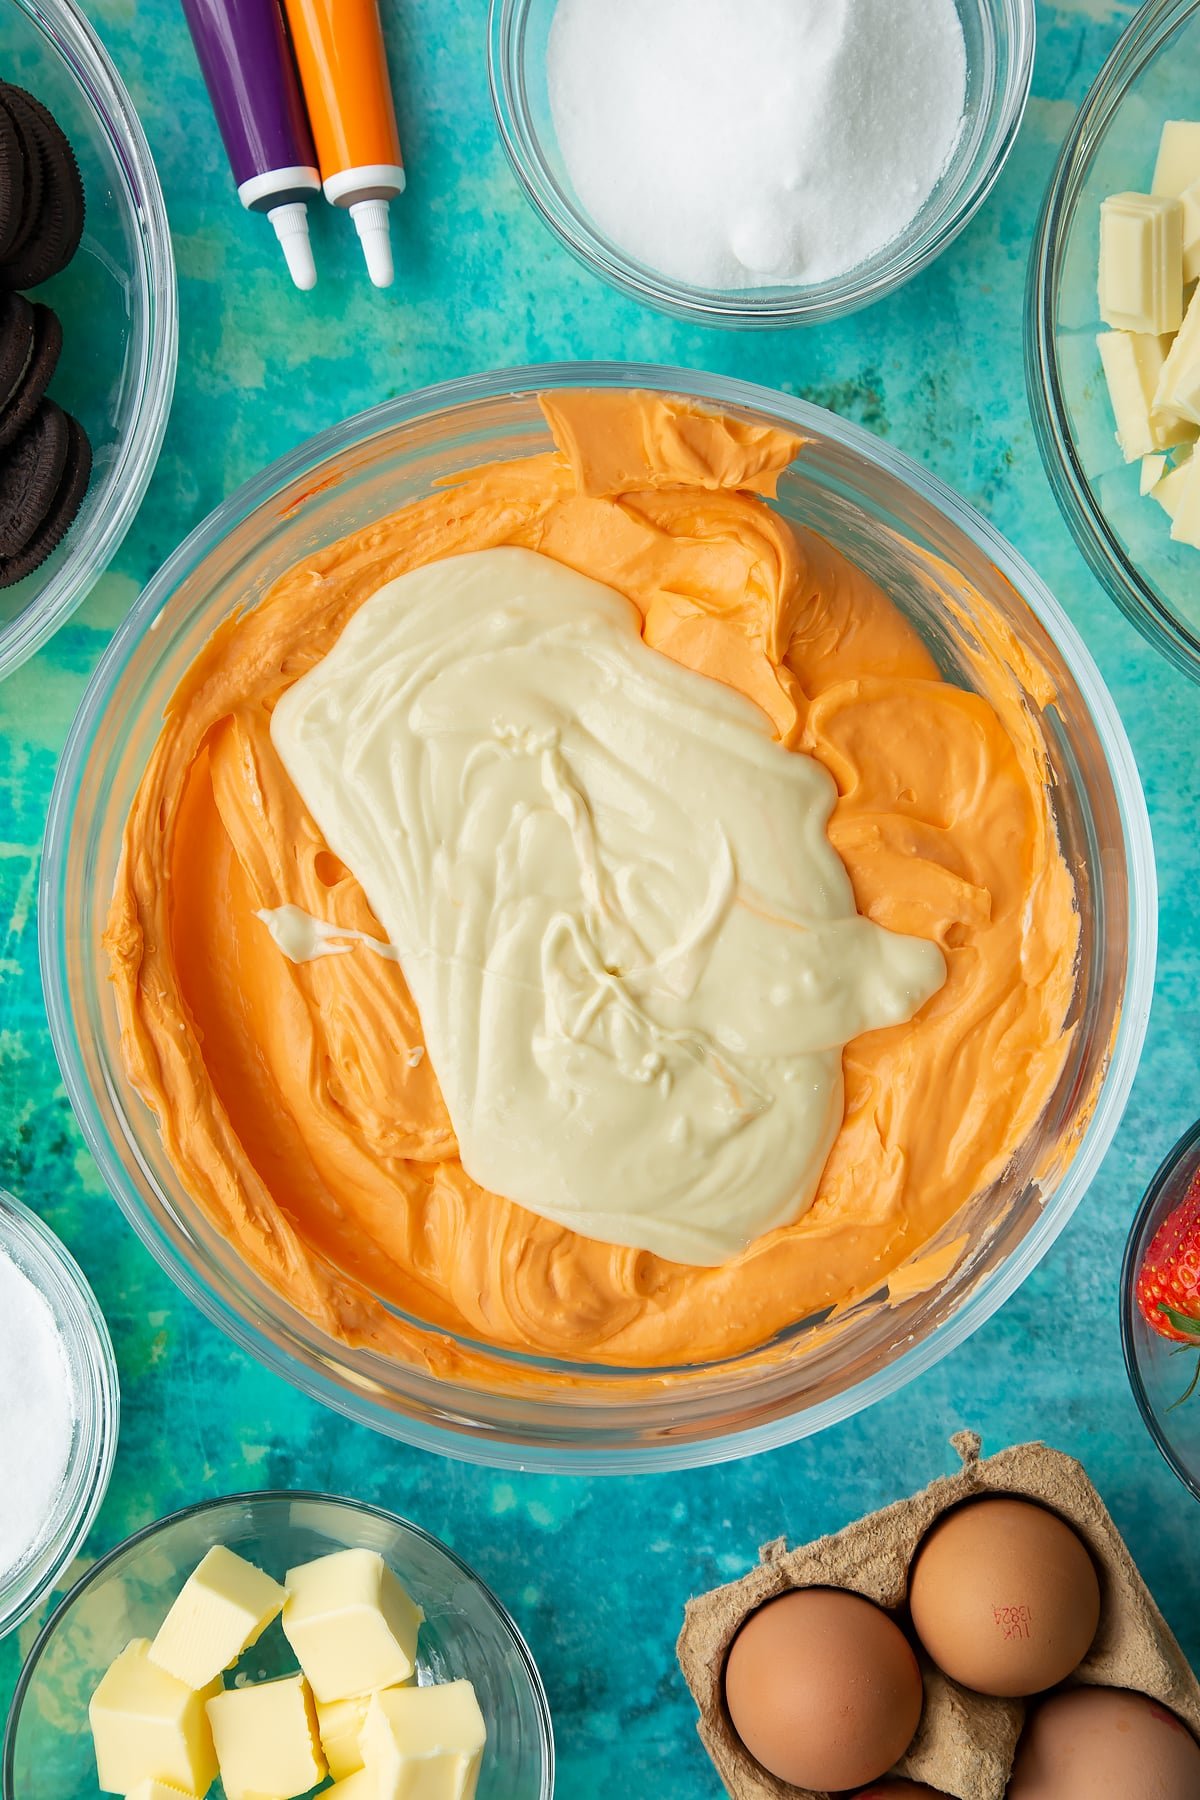 Orange cheesecake mix topped with white chocolate in a bowl. Ingredients to make Halloween cheesecake surround the bowl.